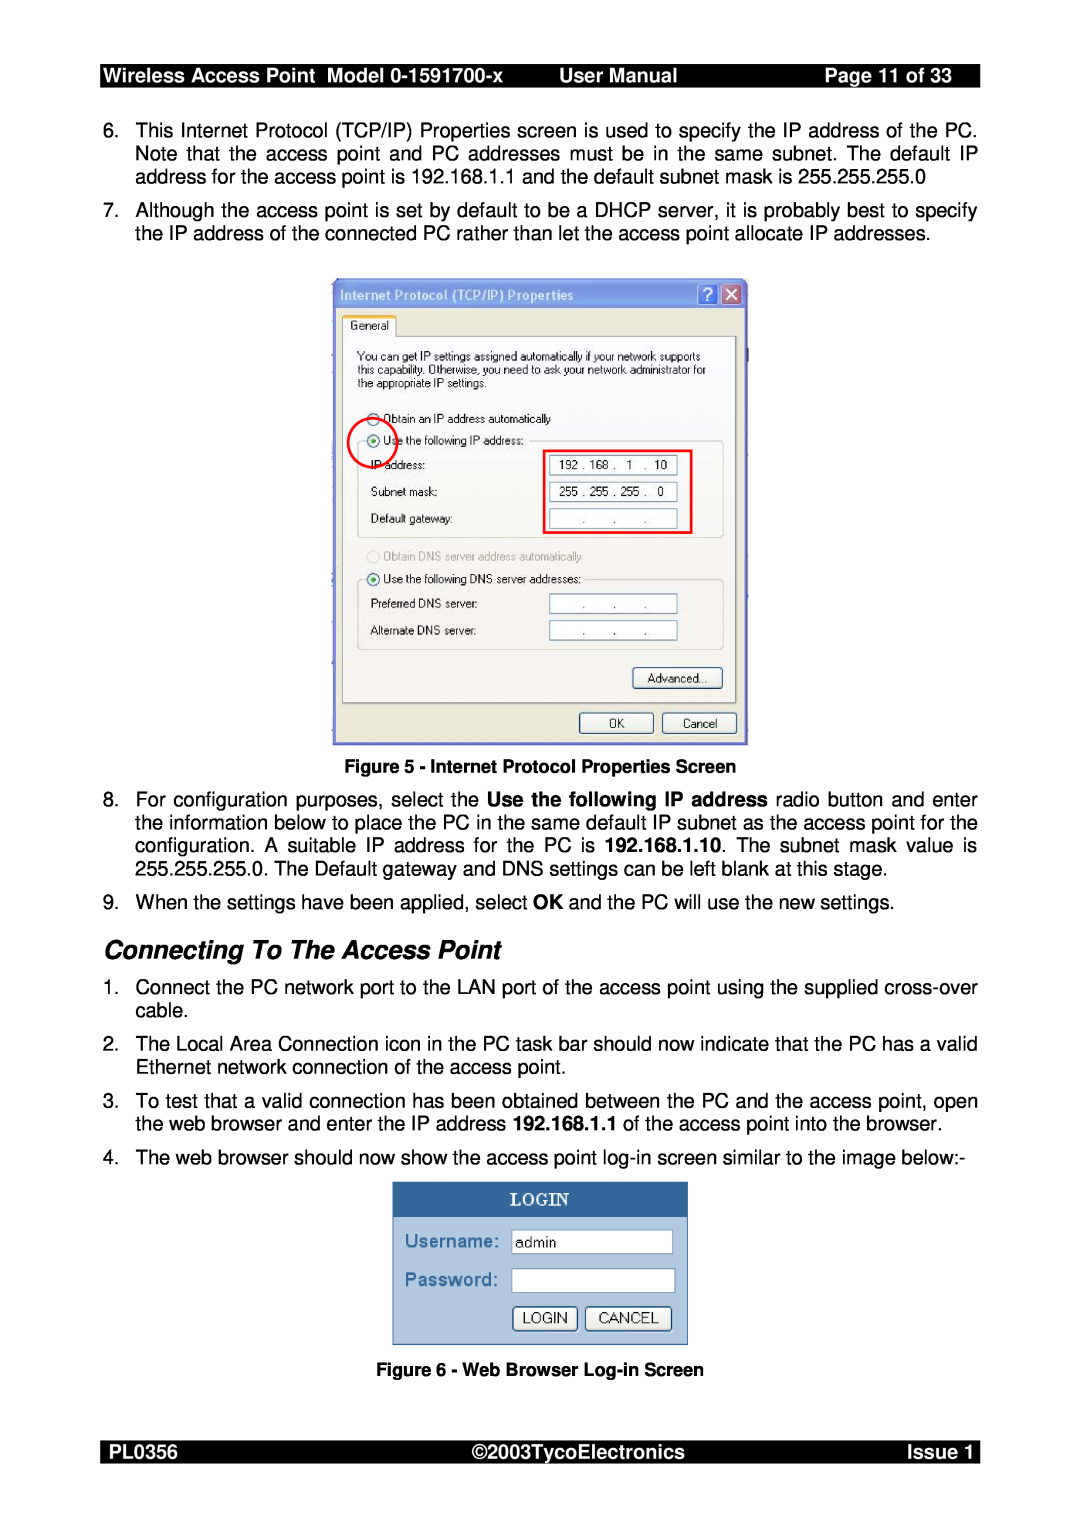 Tyco 0-1591700-x Connecting To The Access Point, Page 11 of, Wireless Access Point Model, User Manual, PL0356, Issue 